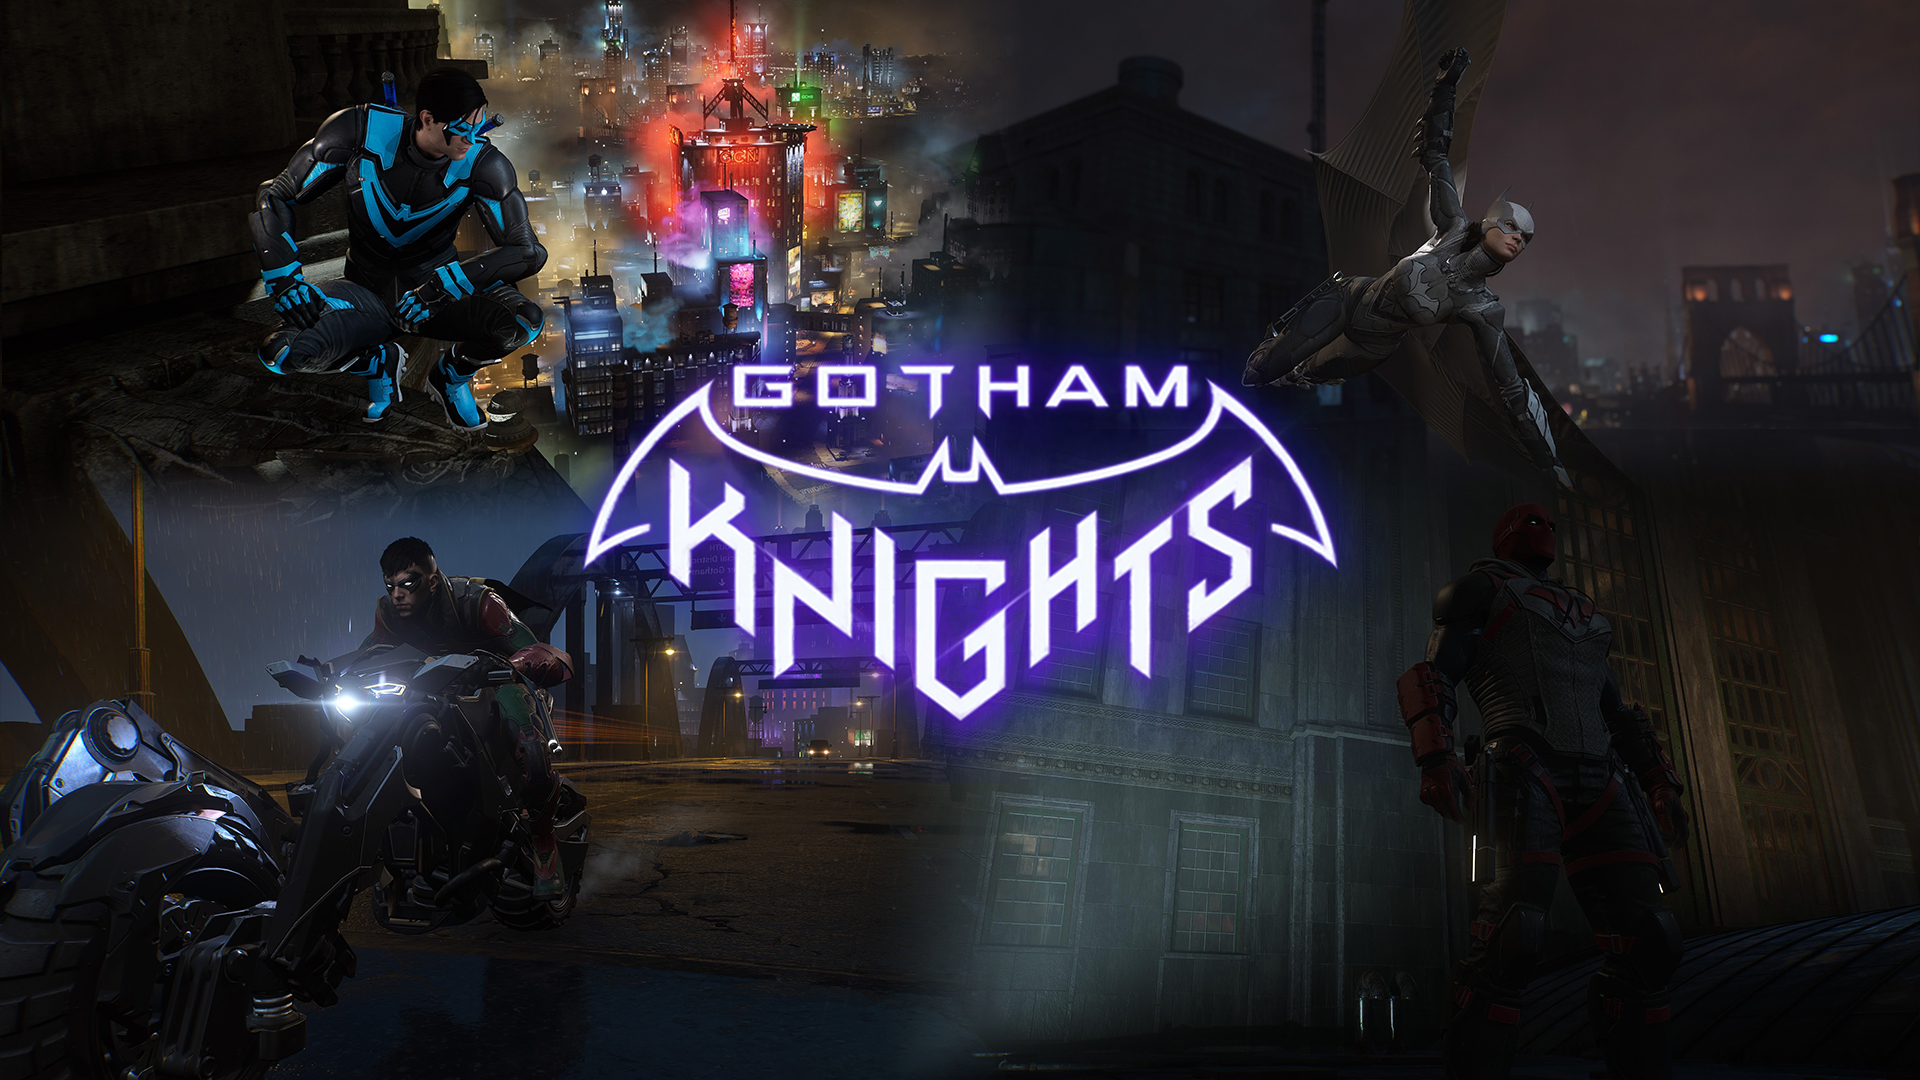 Gotham Knights - Game Overview